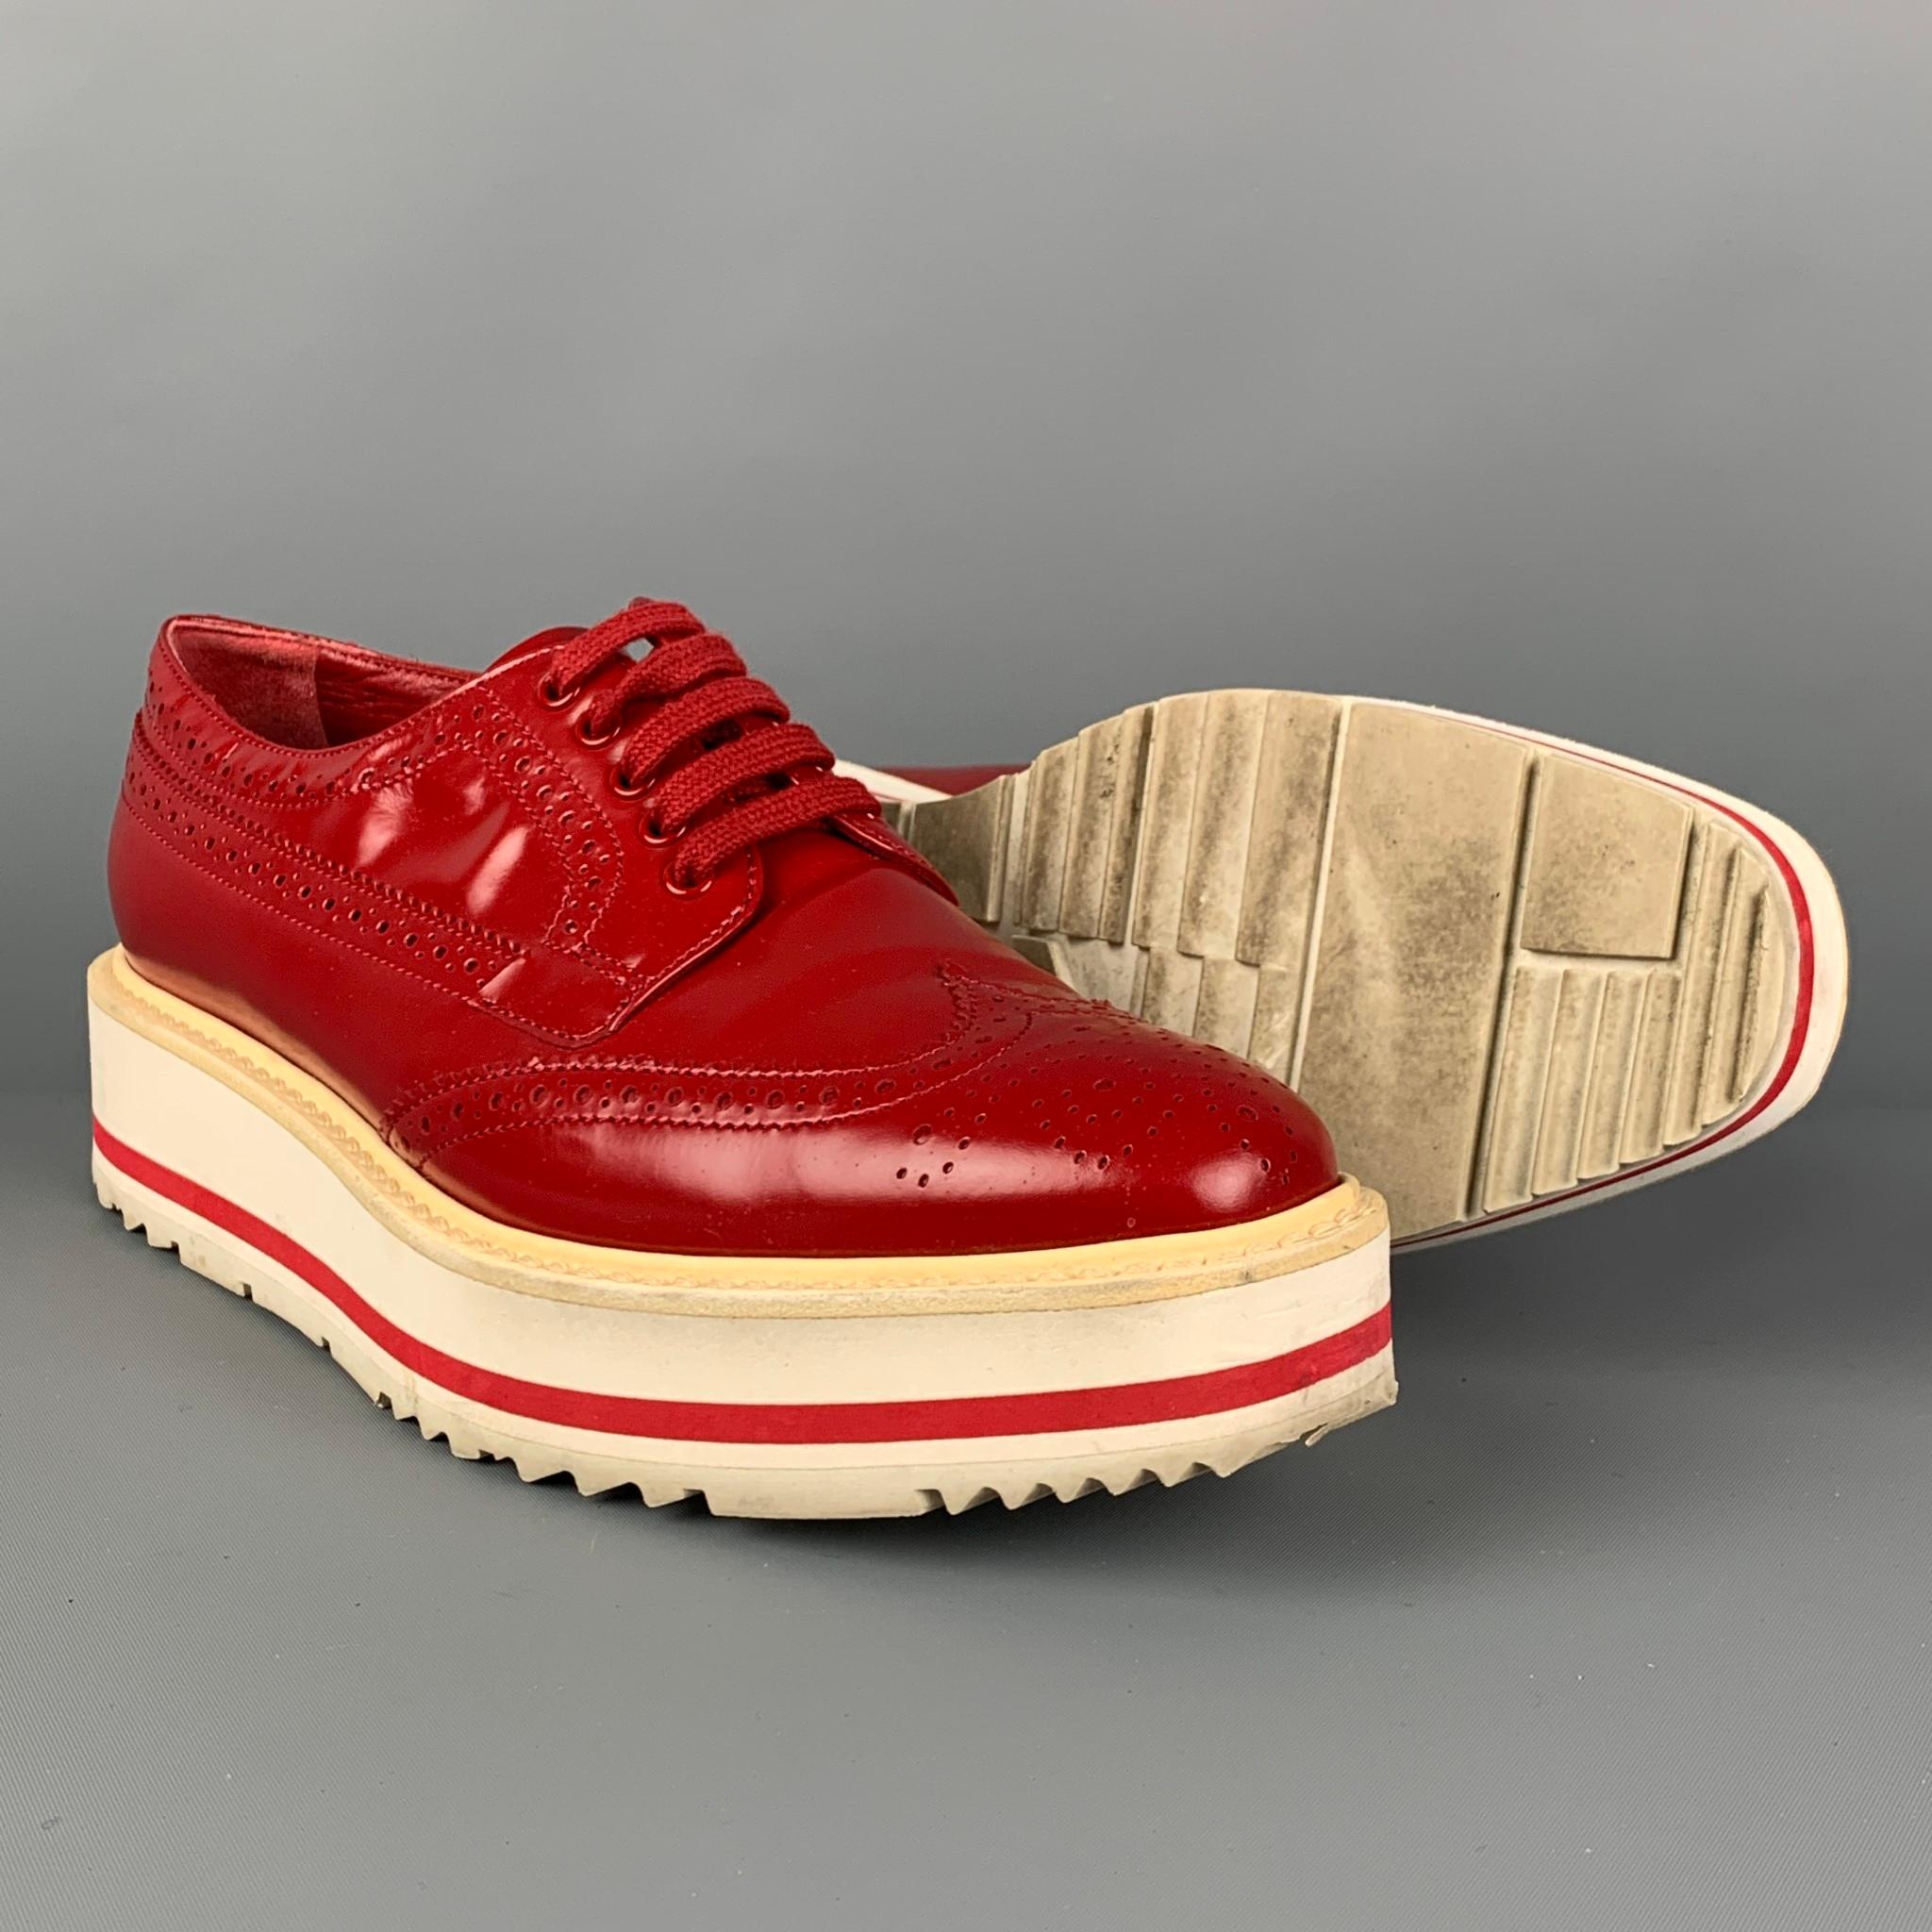 red and white wingtip shoes